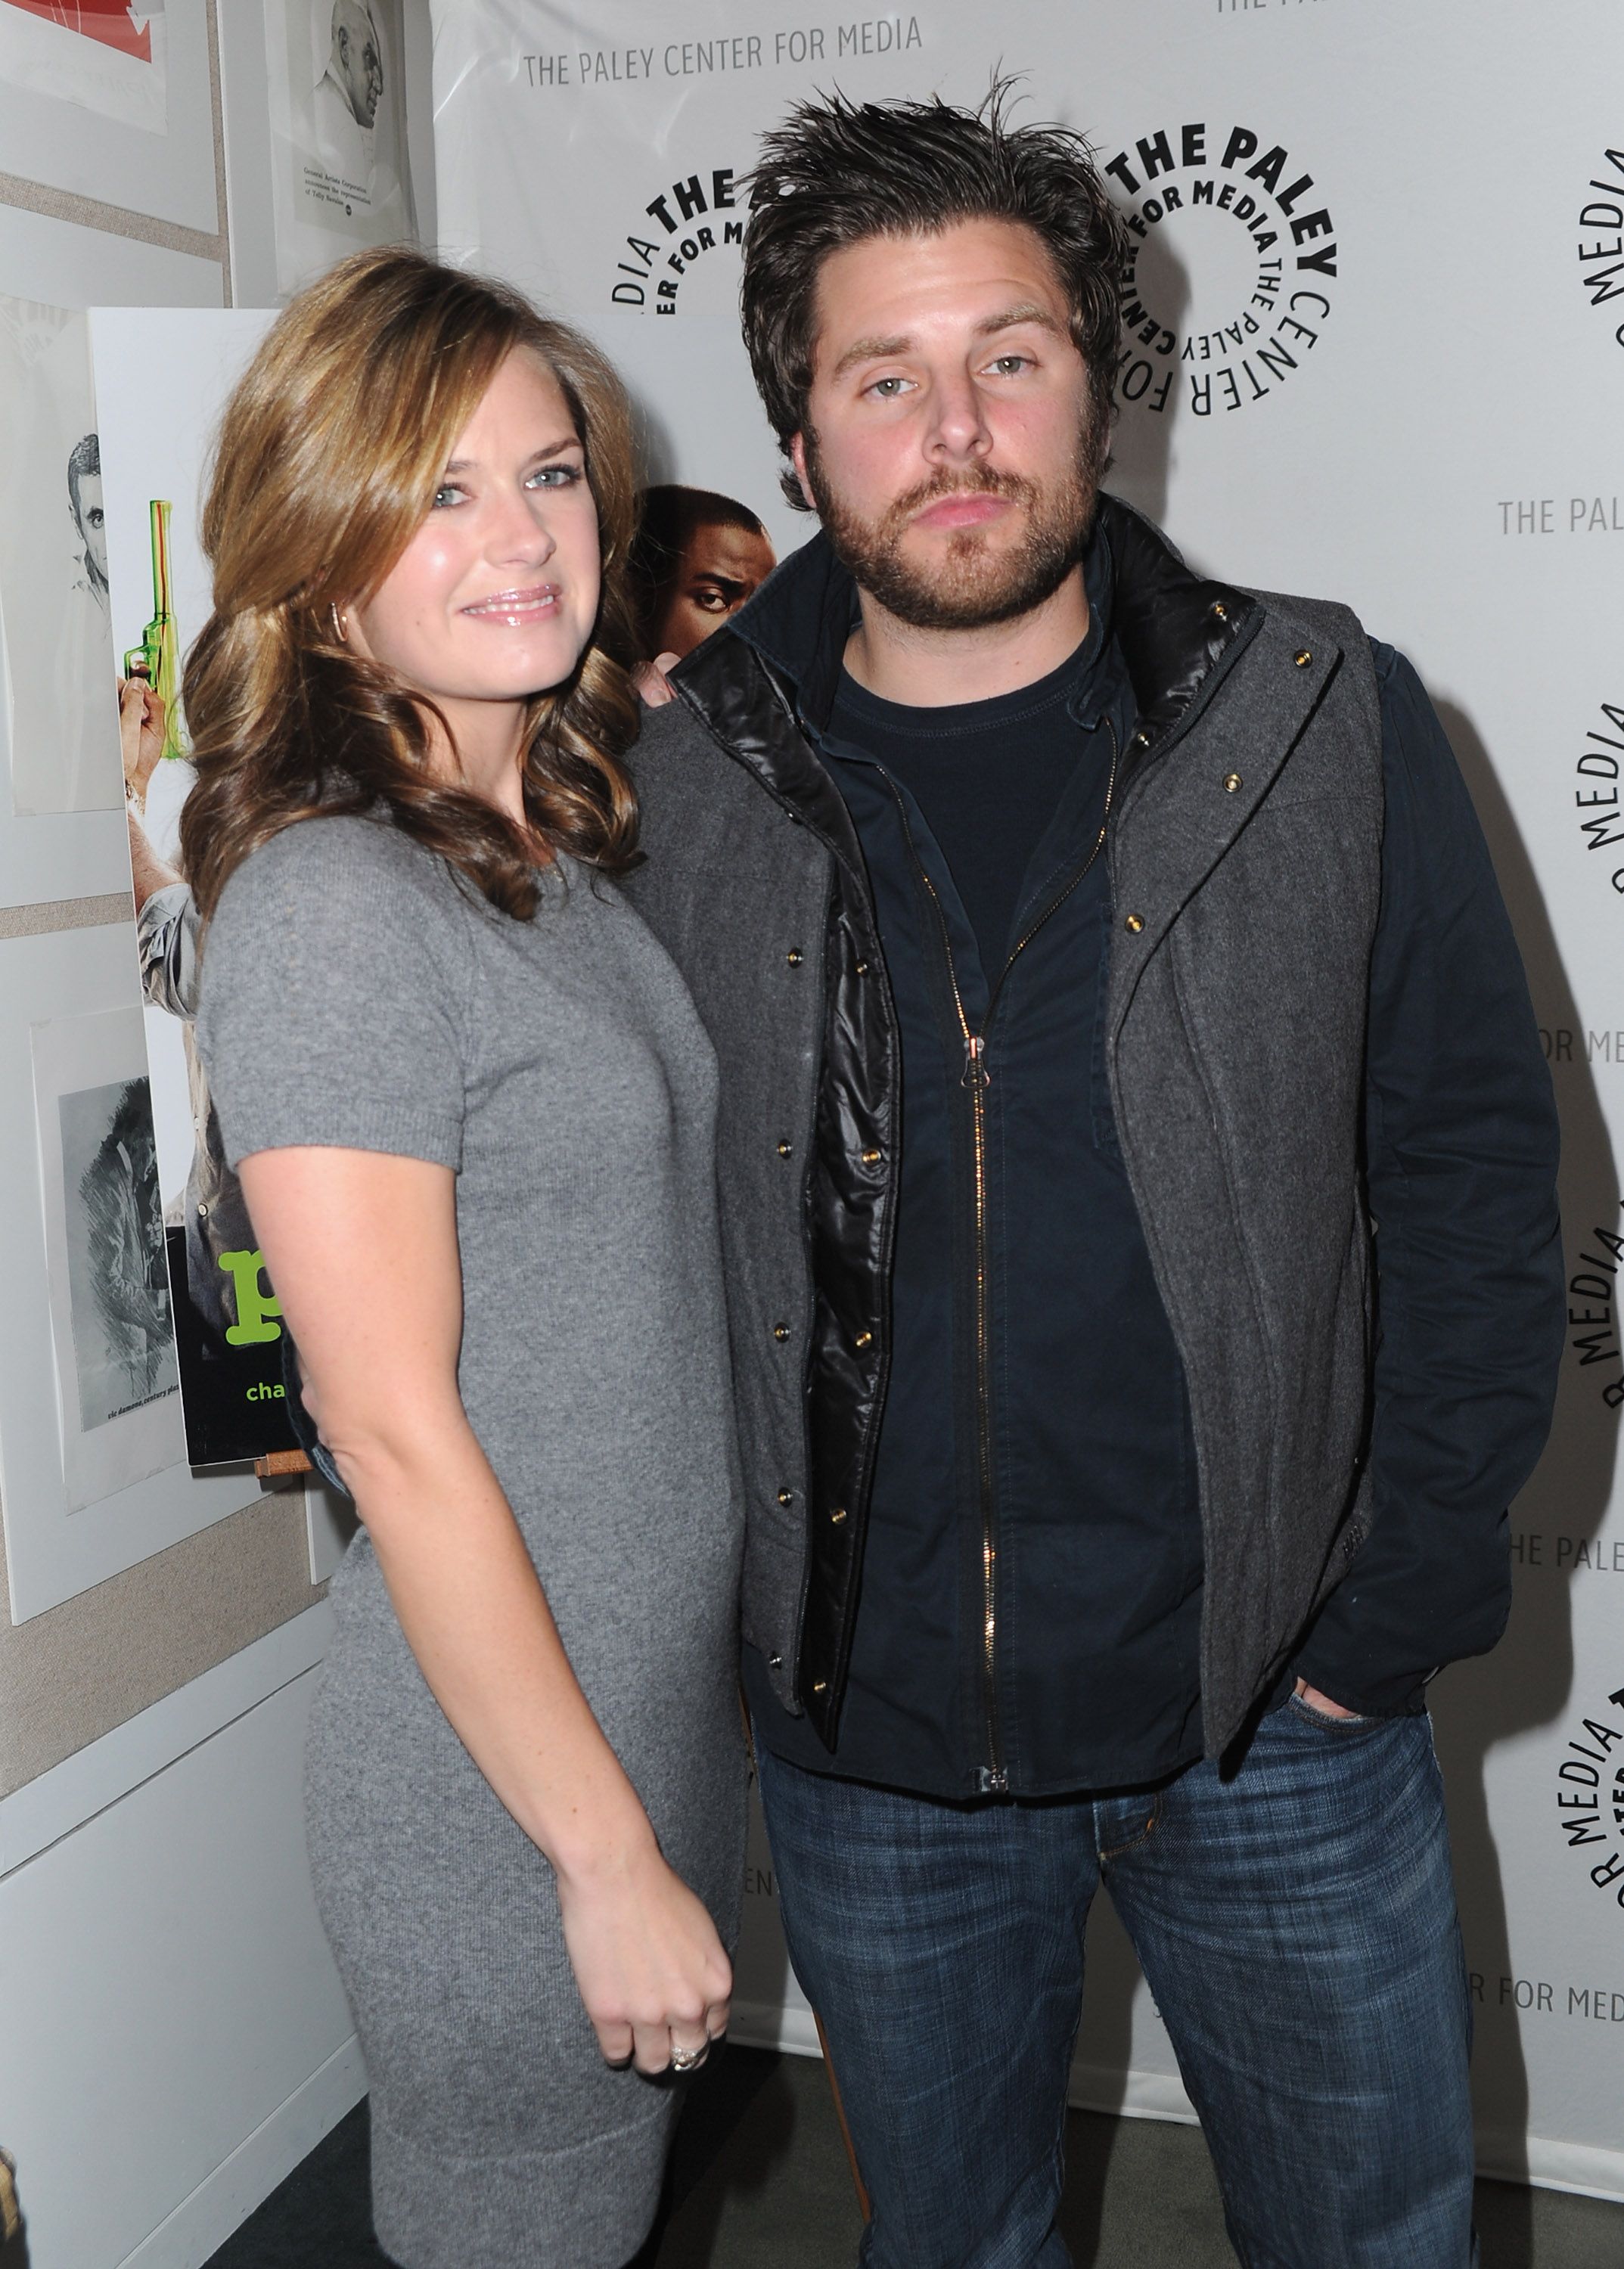 Maggie Lawson and James Roday at The Paley Center For Media's presentation of a "Psych" And "Twin Peaks" Reunion on November 29, 2010, in Beverly Hills, California. | Source: Getty Images